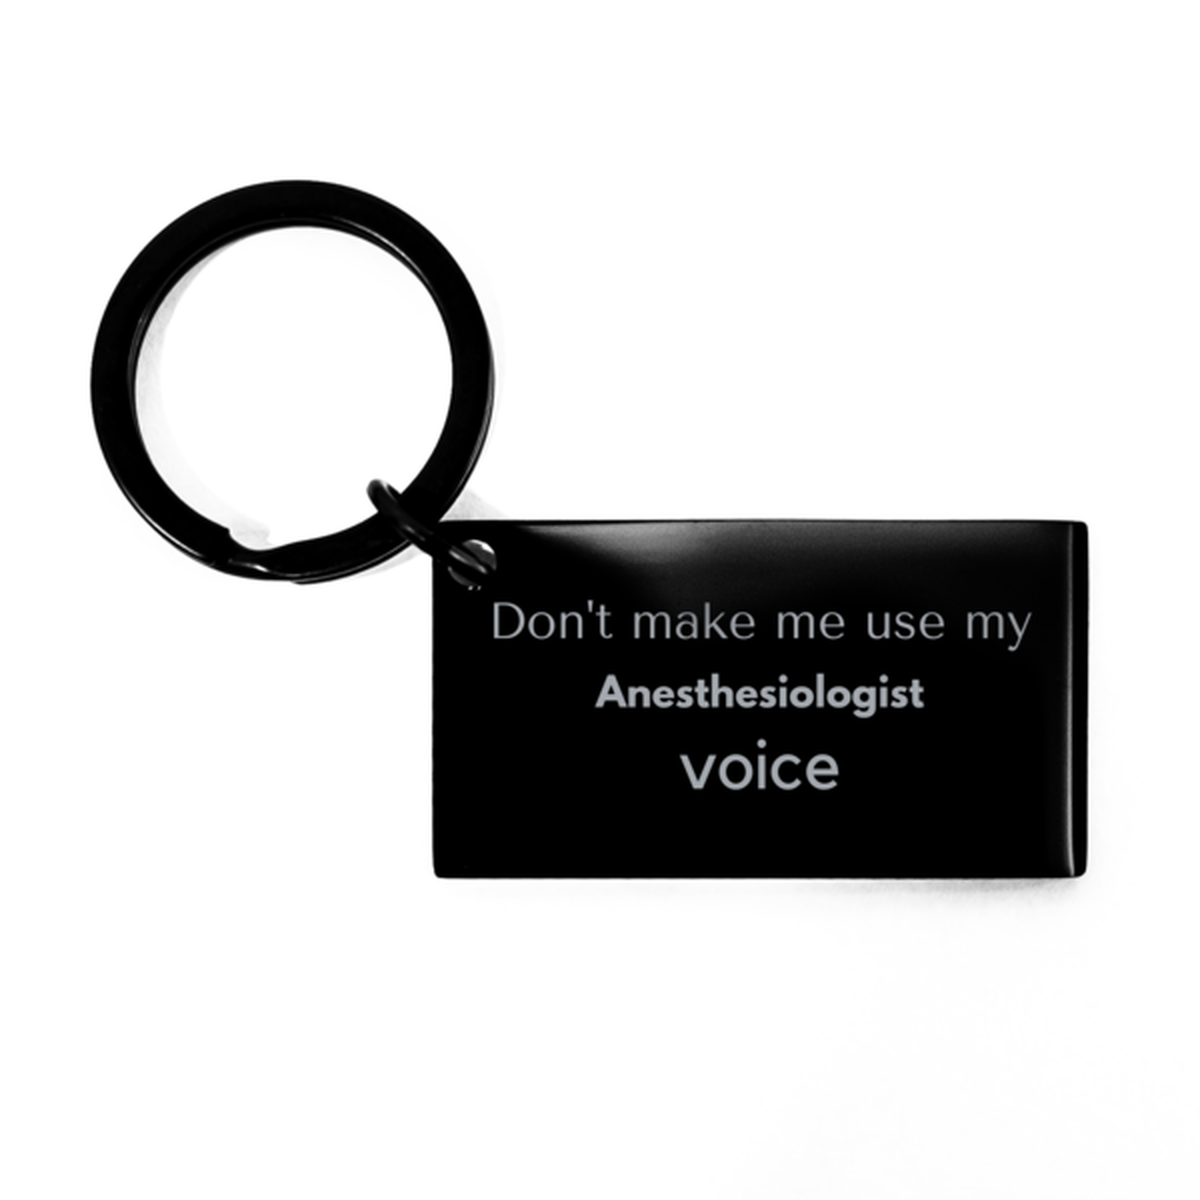 Don't make me use my Anesthesiologist voice, Sarcasm Anesthesiologist Gifts, Christmas Anesthesiologist Keychain Birthday Unique Gifts For Anesthesiologist Coworkers, Men, Women, Colleague, Friends